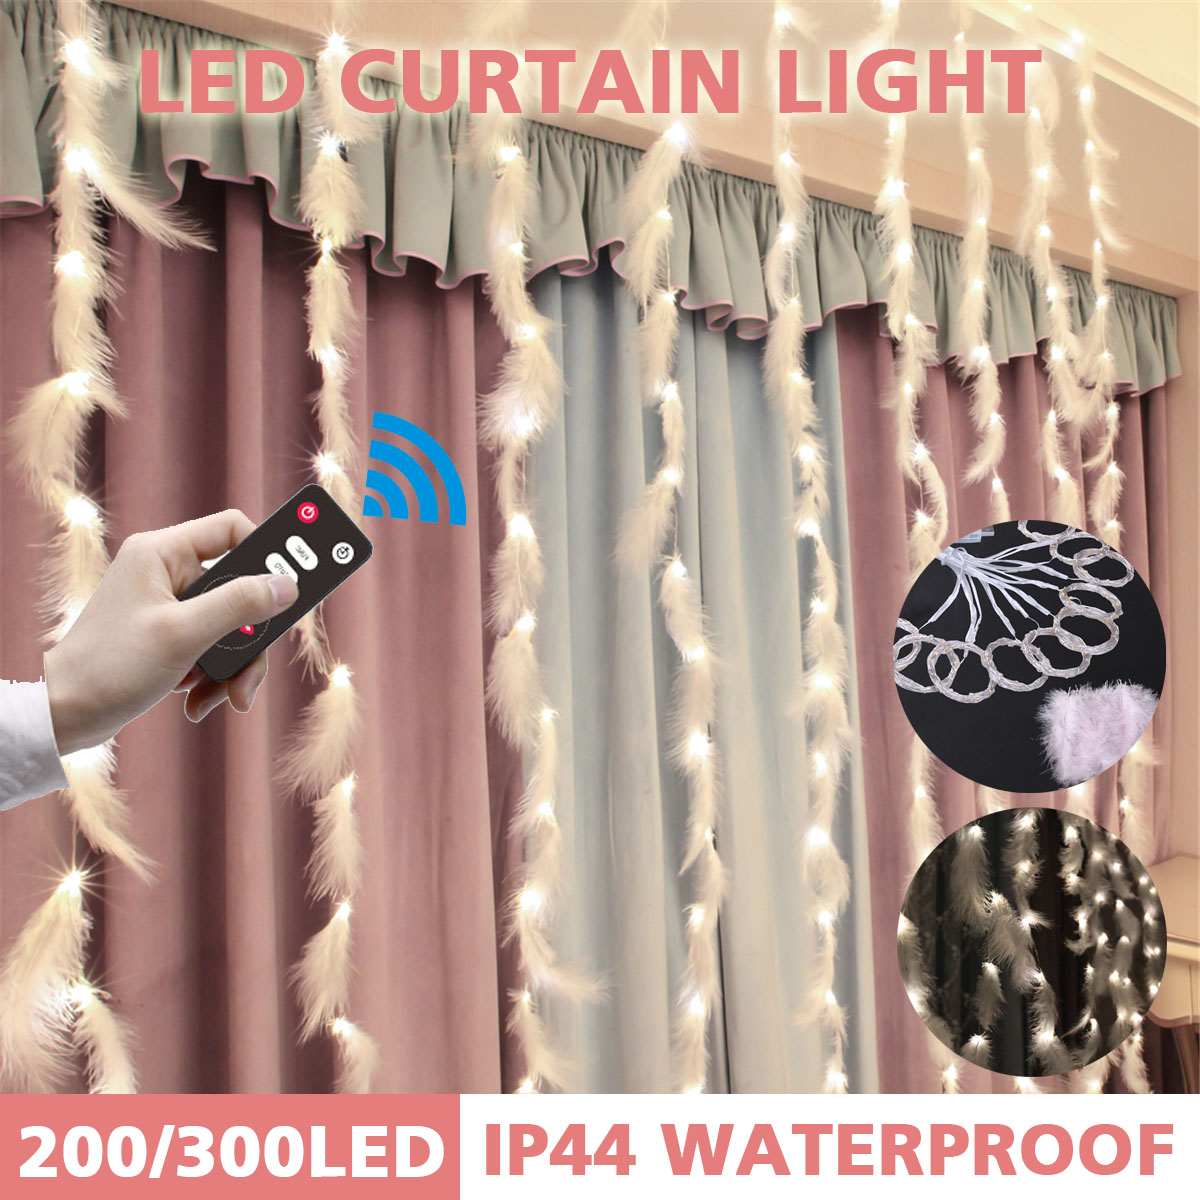 32M-33M-Feather-Copper-Wire-8-Modes-LED-Curtain-String-Light-USB-Lamp-for-Room-Party-Decoration-1675914-1